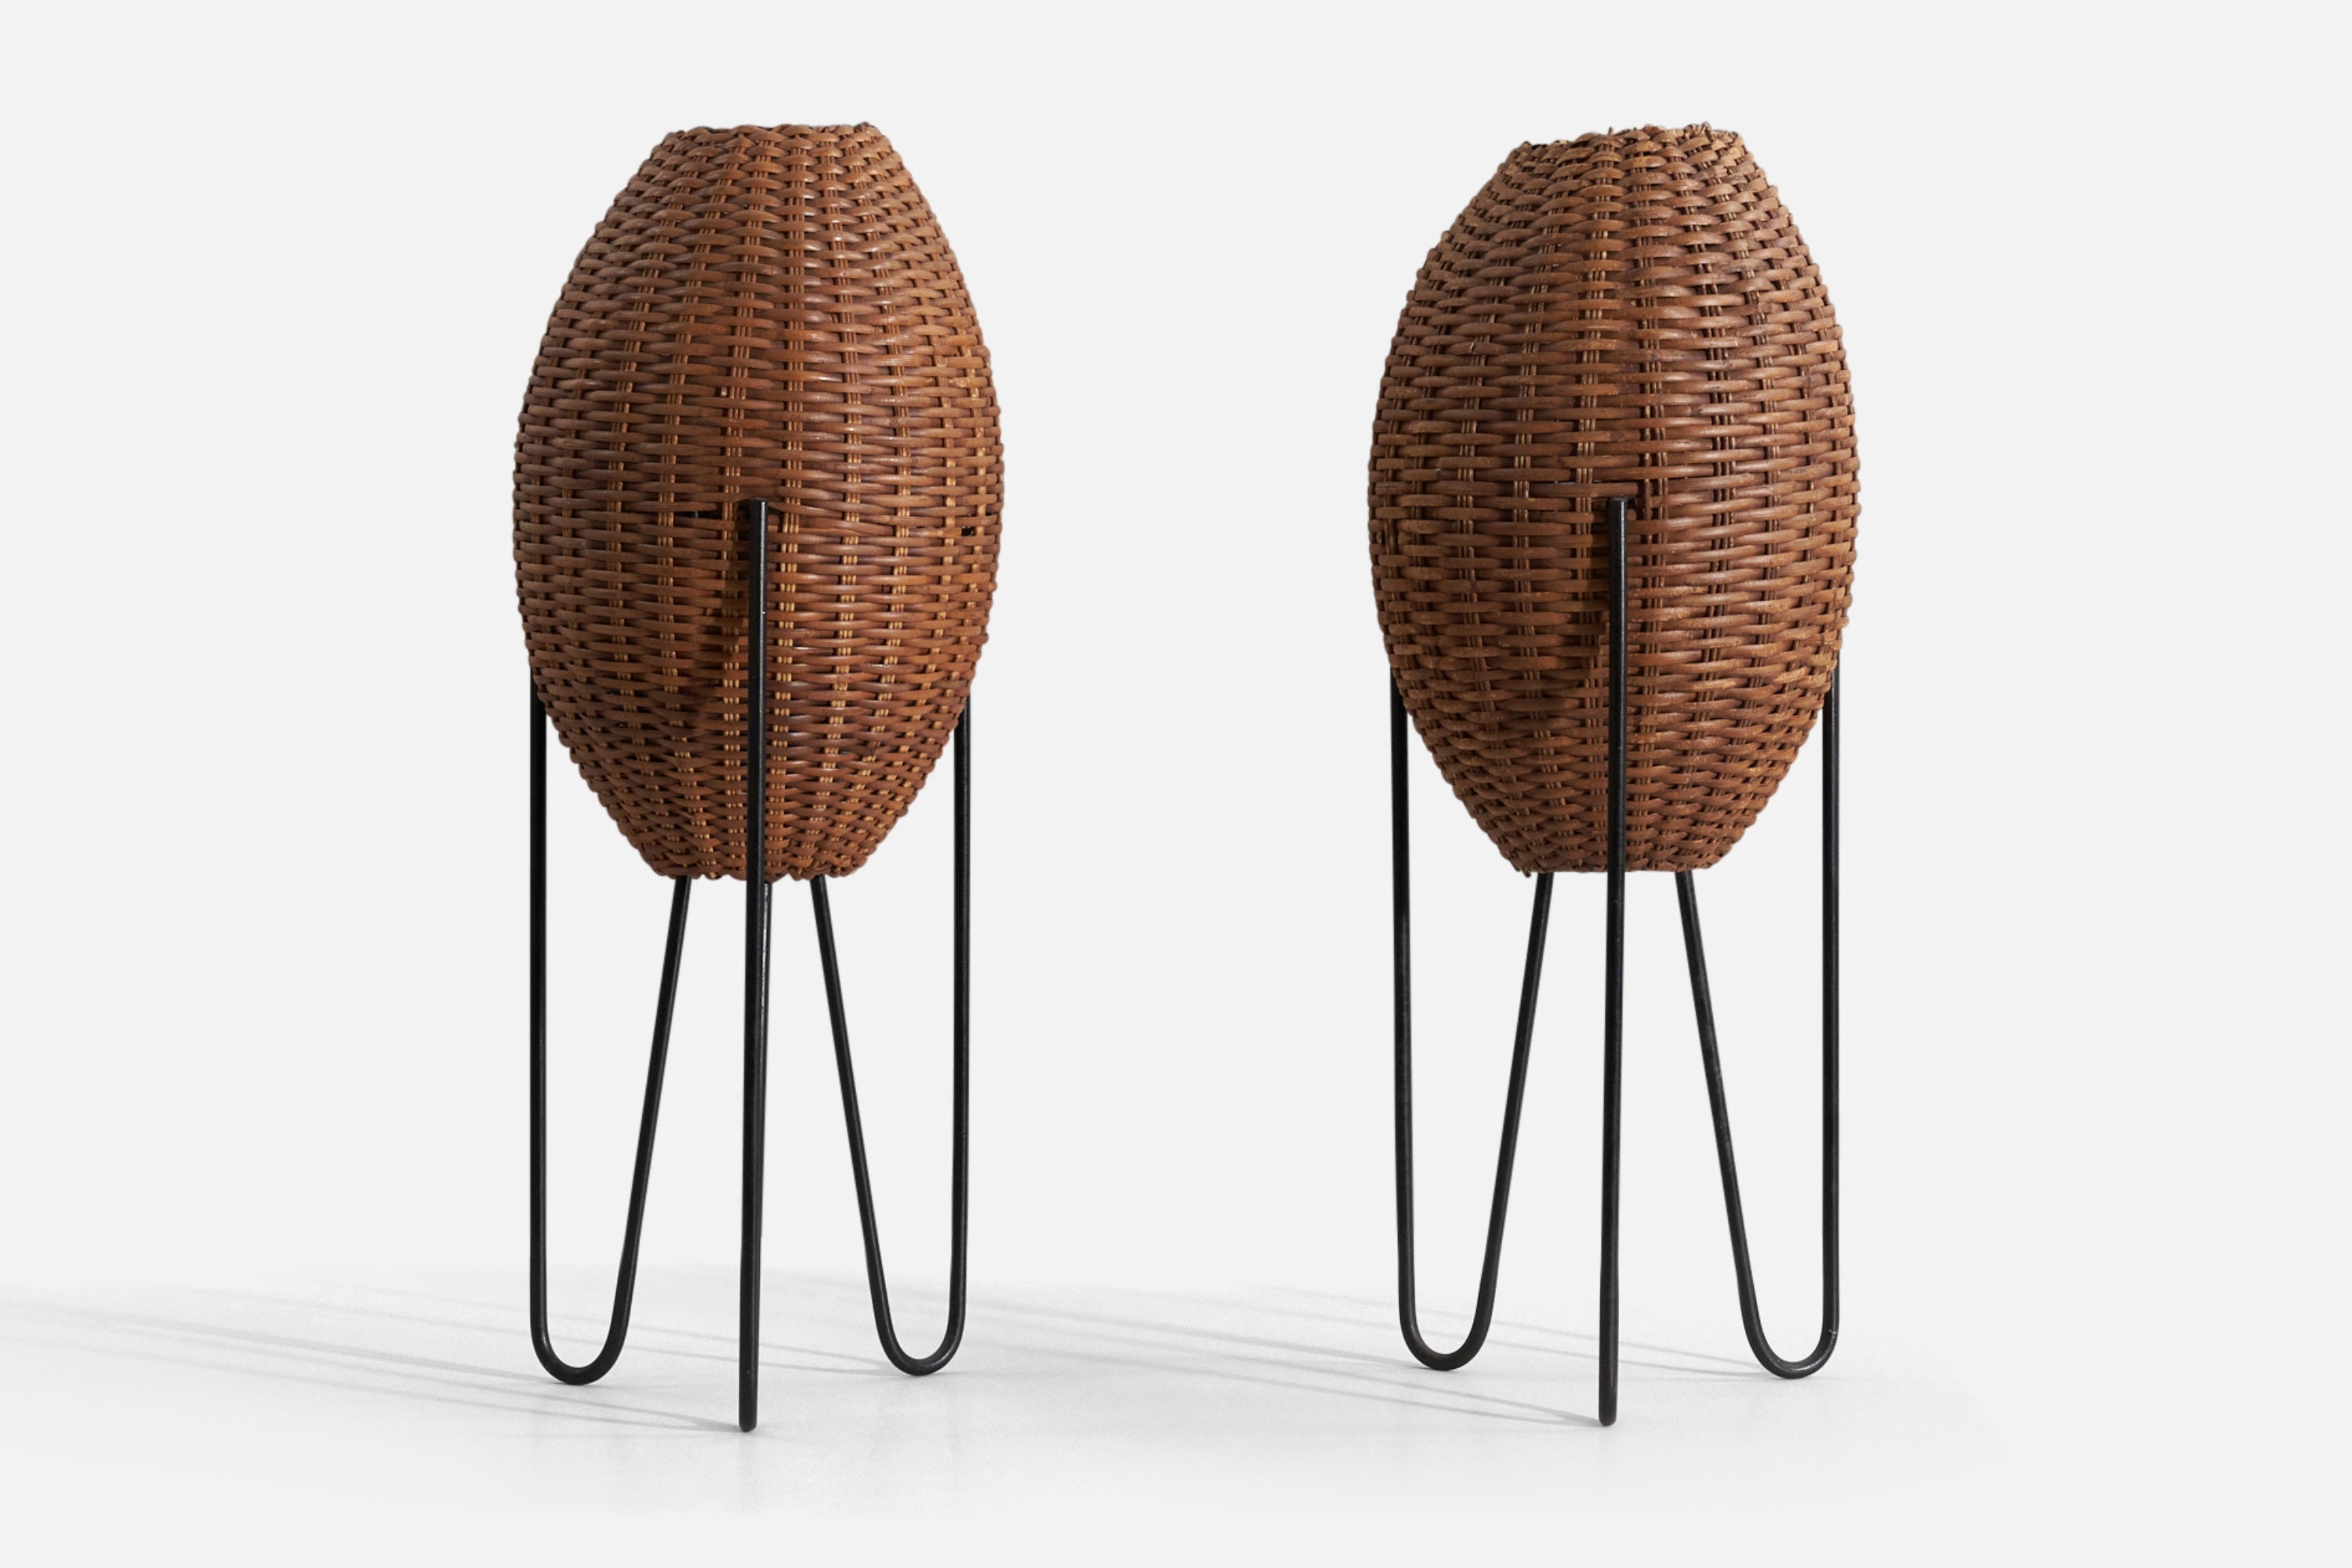 Paul Mayén, Large Table Lamps, Wicker, Enameled Metal, United States, c. 1965 For Sale